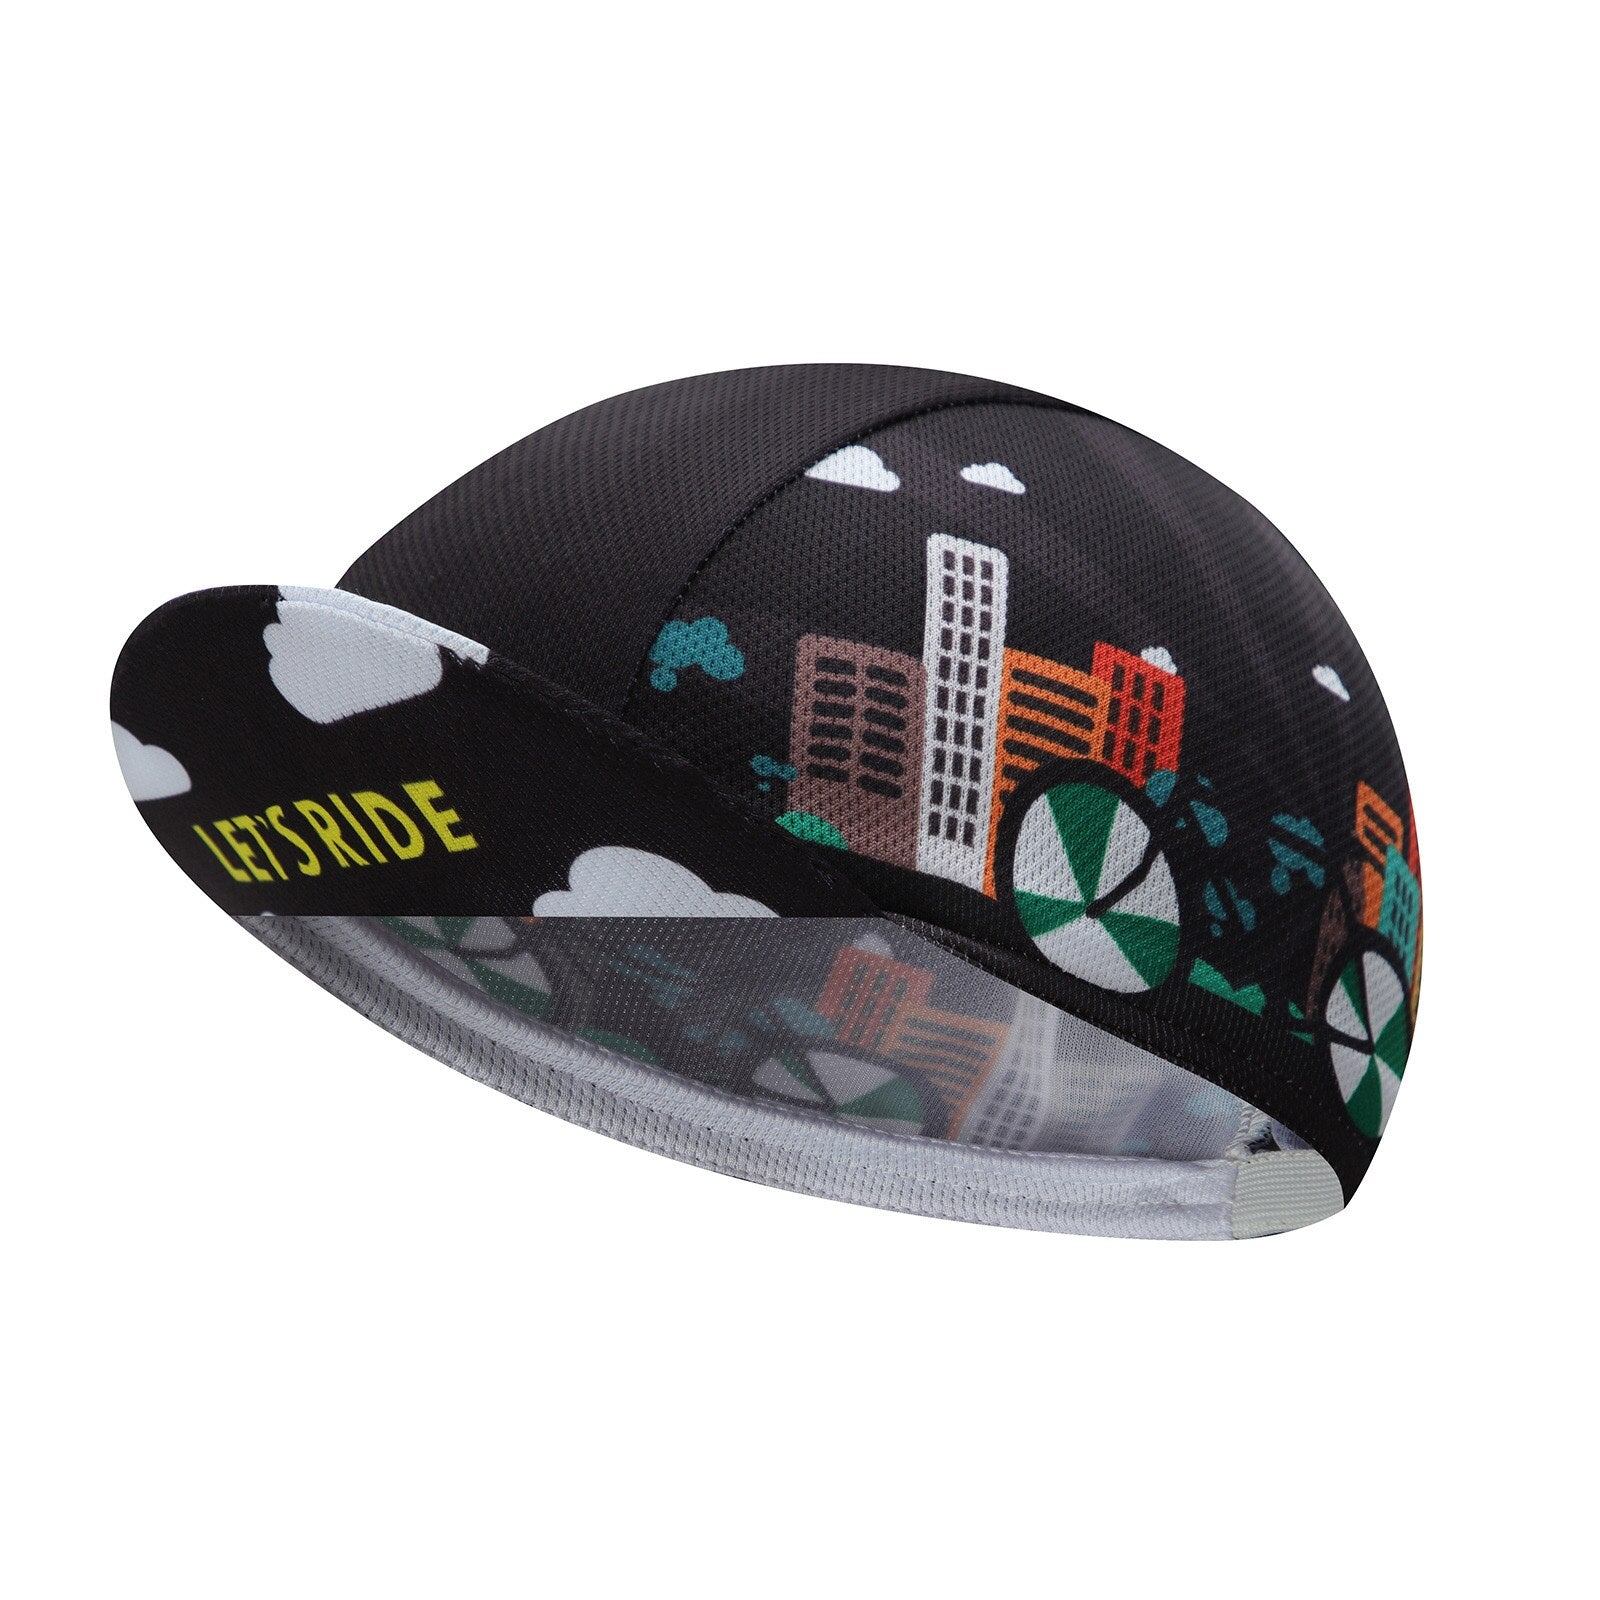 Funny Cycling Cap - Polyester Cycling Hat-Under Helmet - Cycling Helmet Liner Breathable&Sweat Uptake